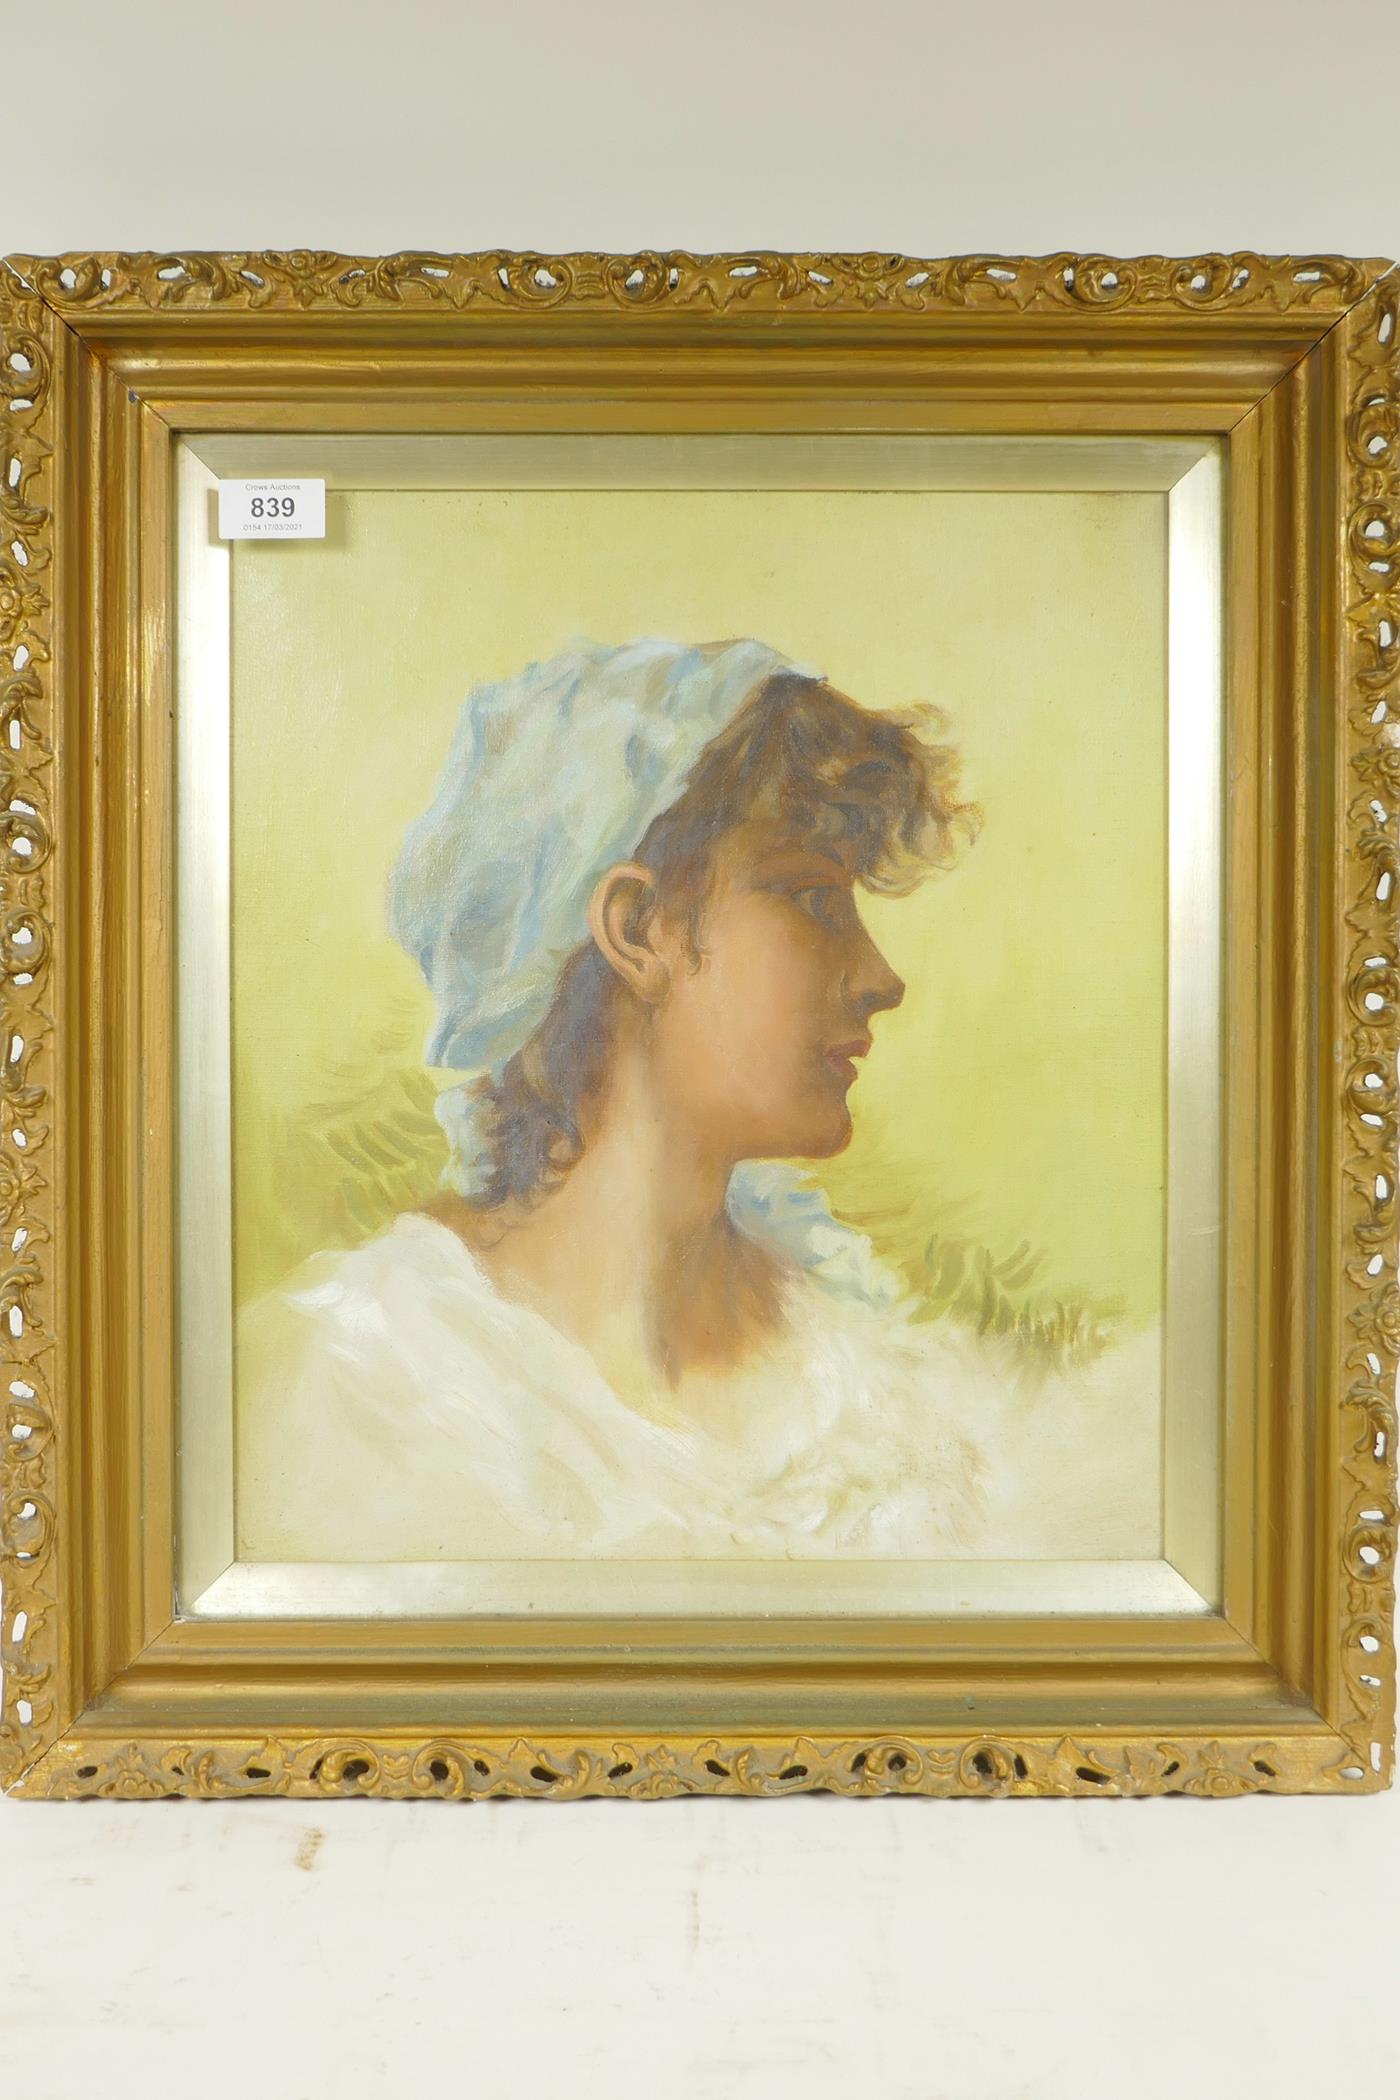 Portrait of a young woman, C19th, oil on canvas, in a good pierced gilt frame, 14" x 16" - Image 2 of 4